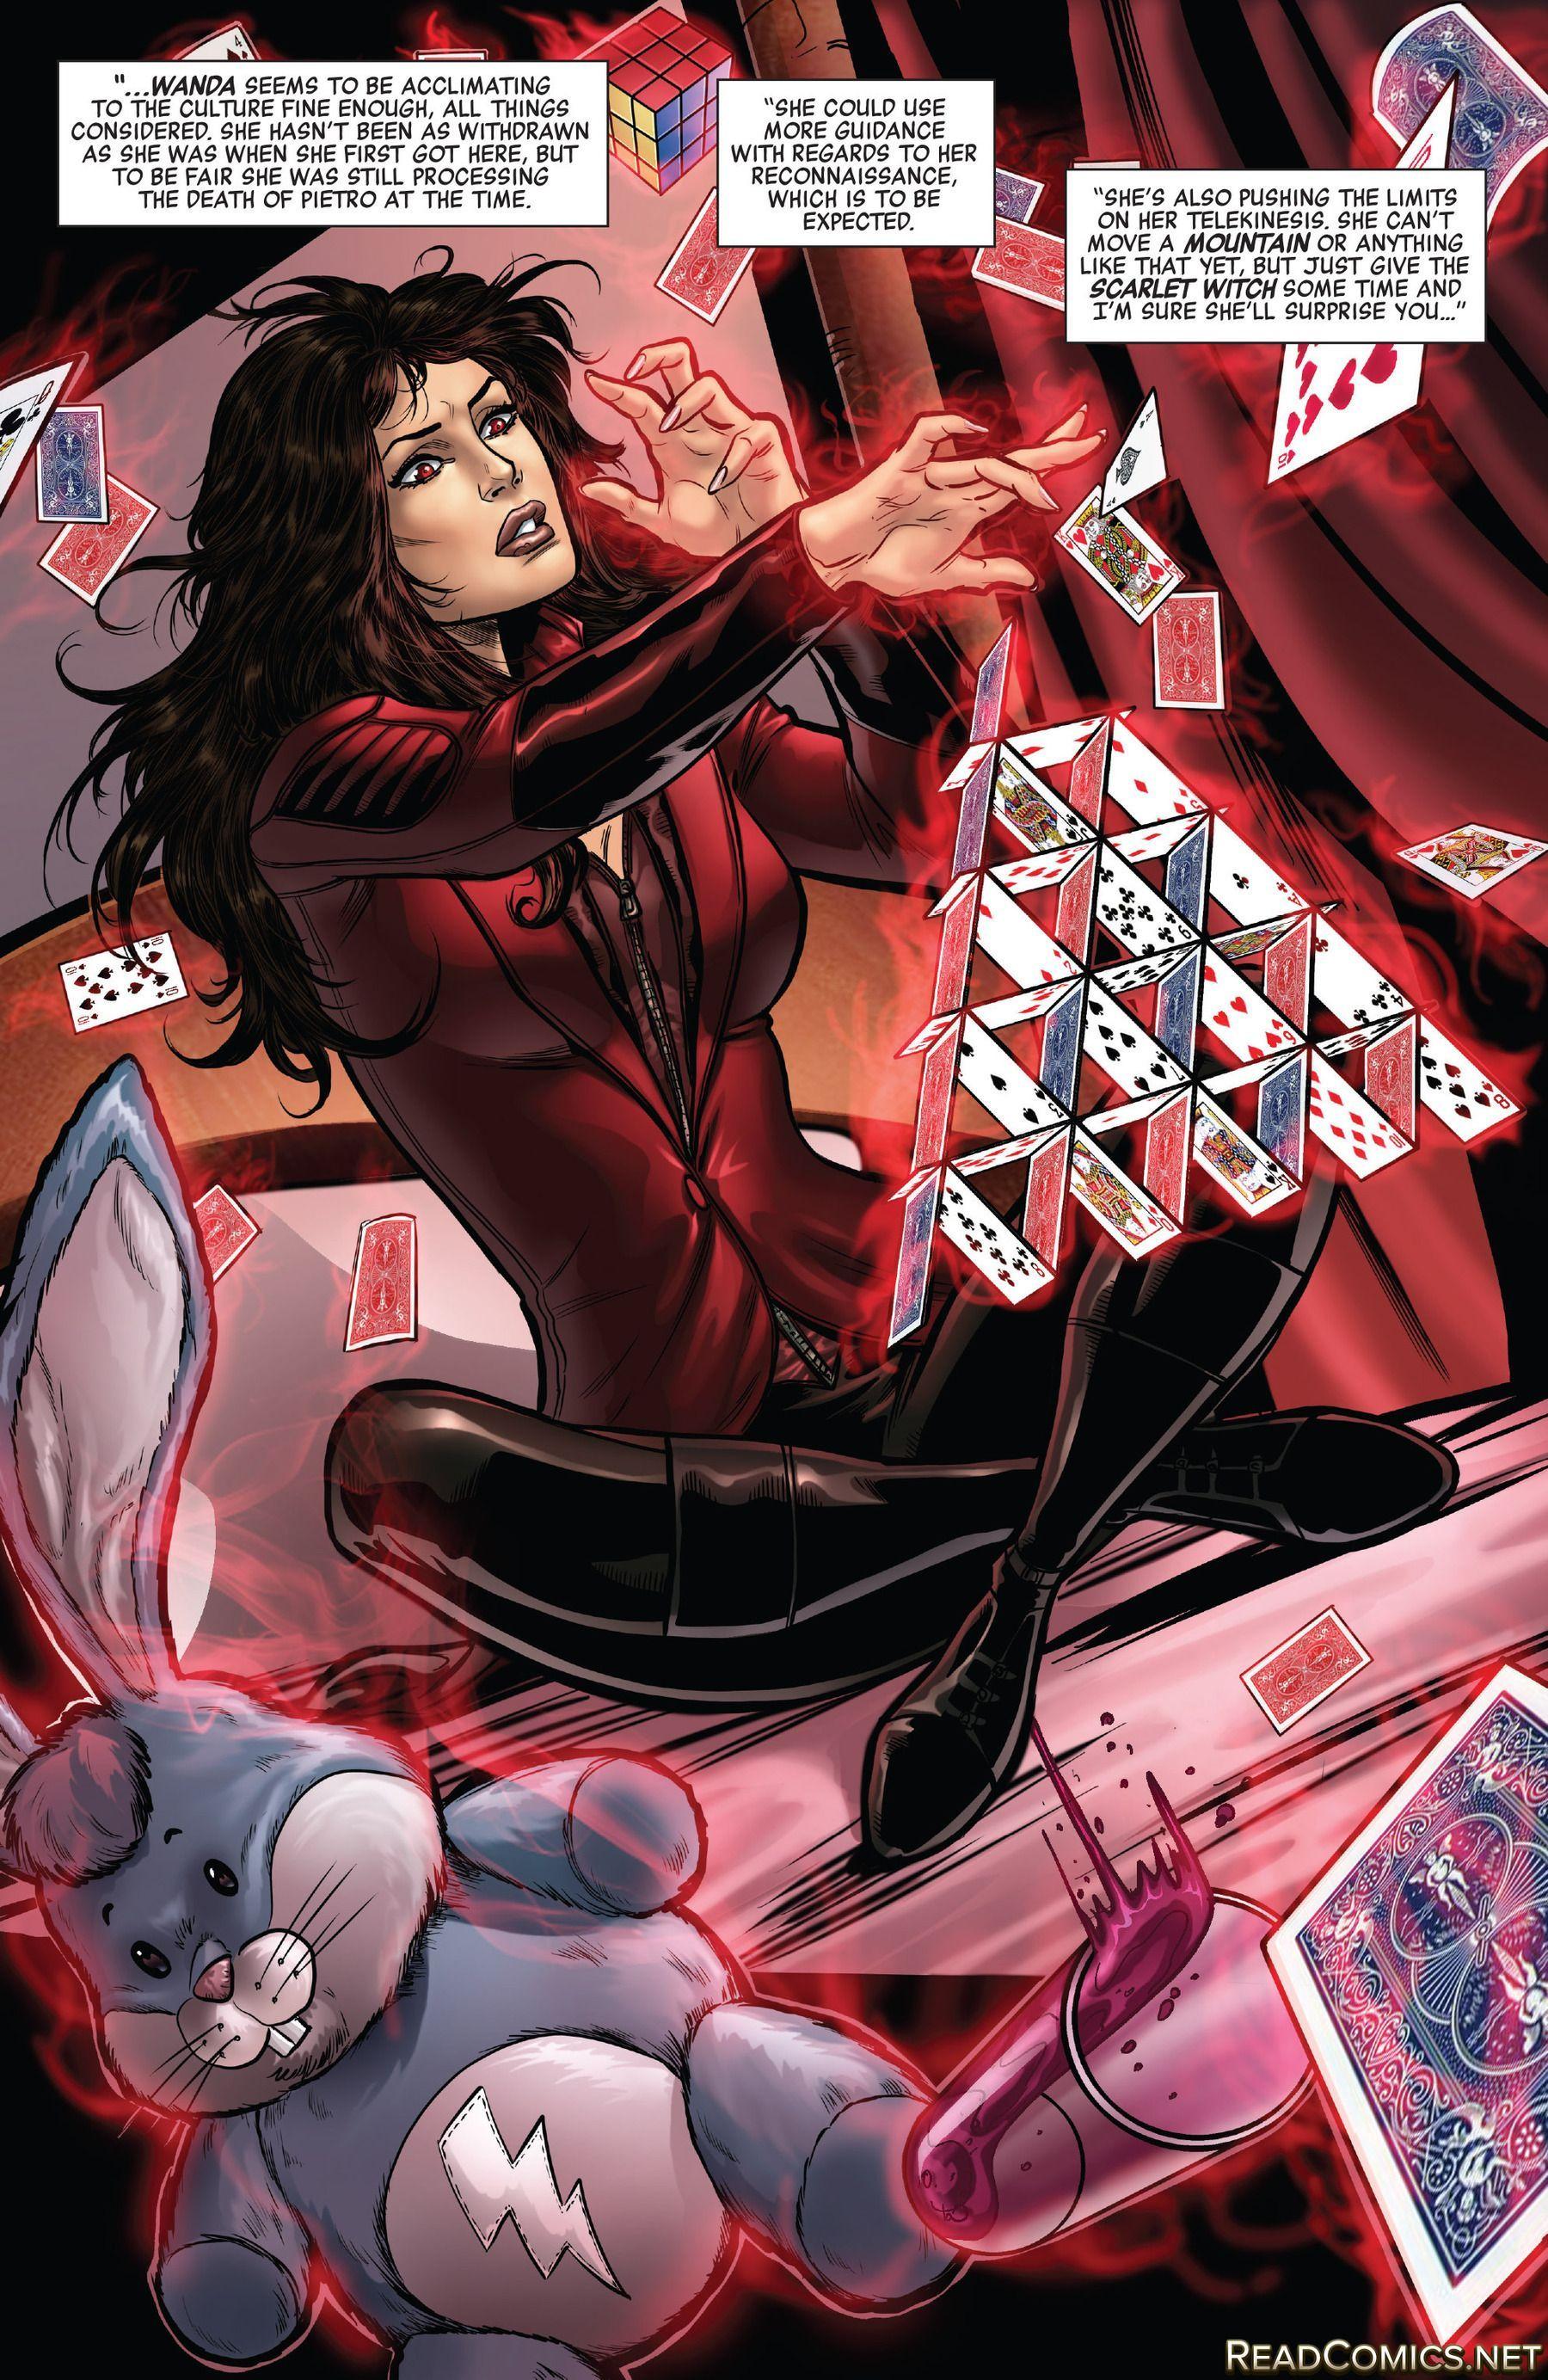 Scarlet Witch Shield Logo - Scarlet Witch - THE BUNNY WITH THE LIGHTNING BOLT ON IT | Geek/Nerd ...